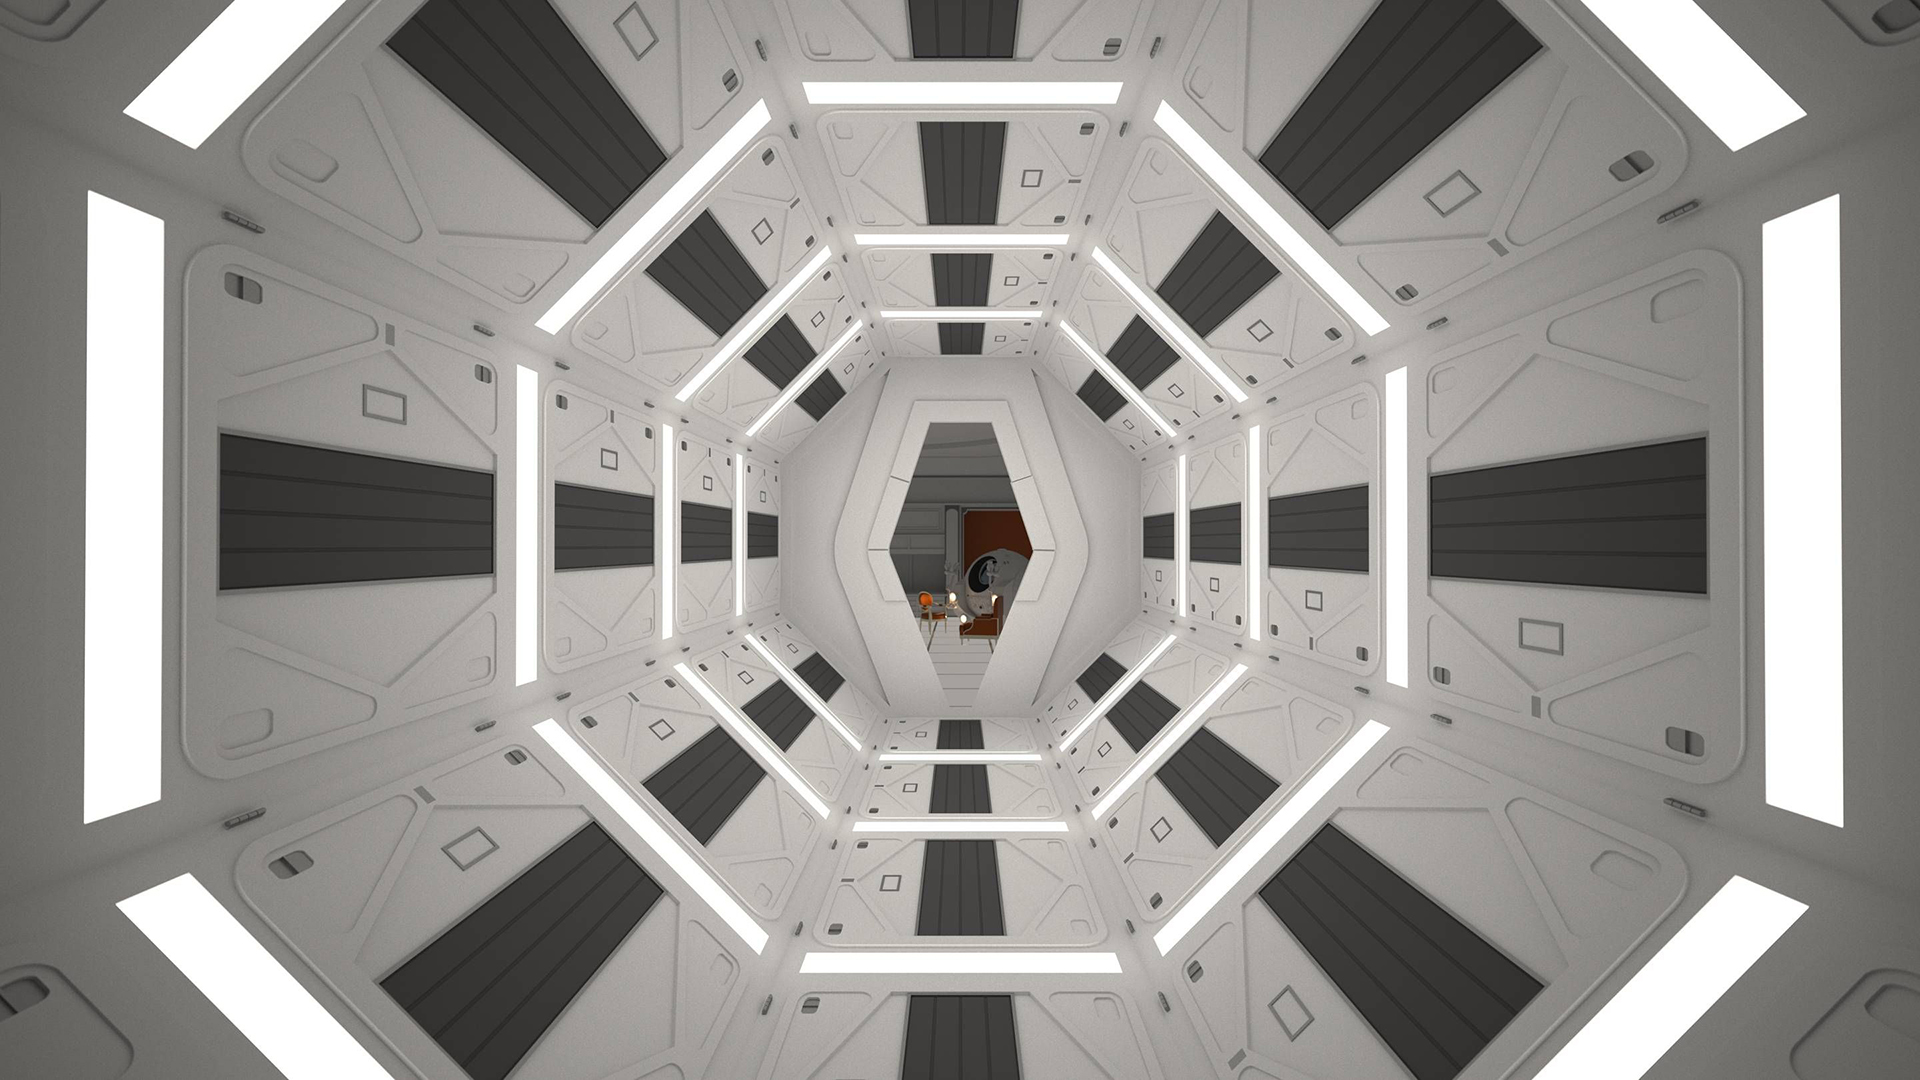 2001: A Space Odyssey hallway. Virtual background to use on Zoom, Microsoft Teams, Skype, Google Meet, WebEx or any other compatible app.